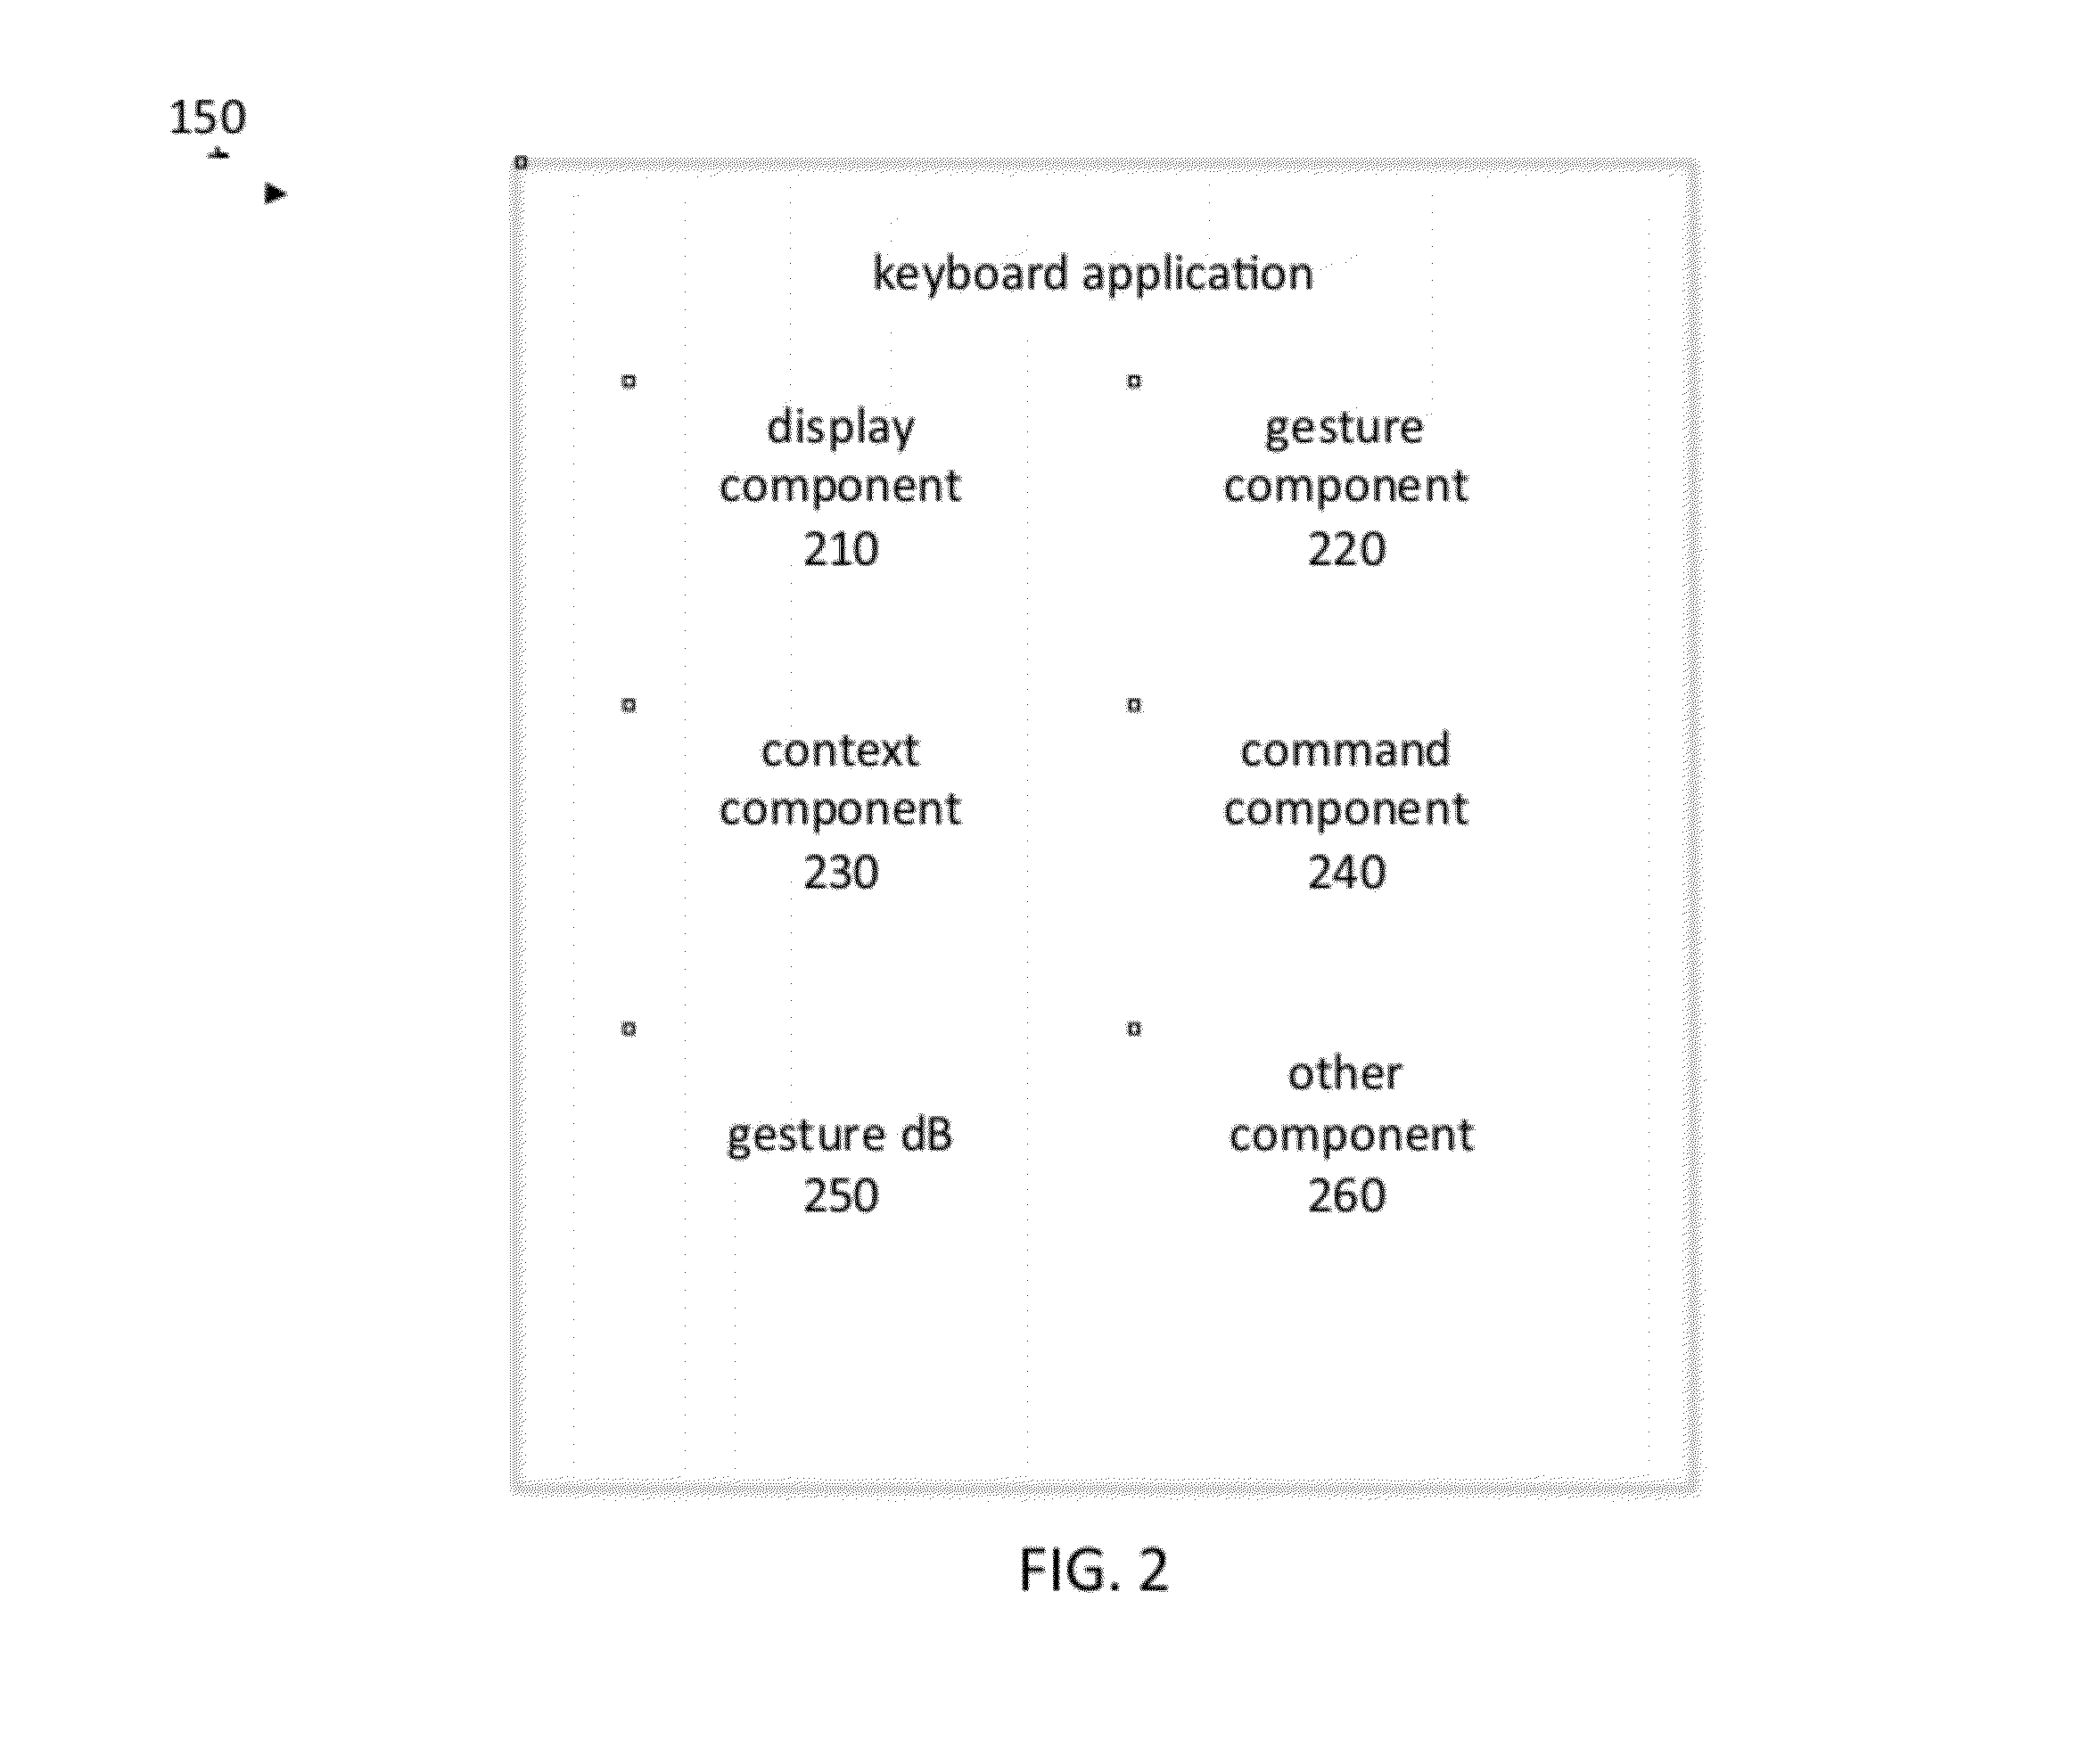 Systems and methods for using entered text to access and process contextual information